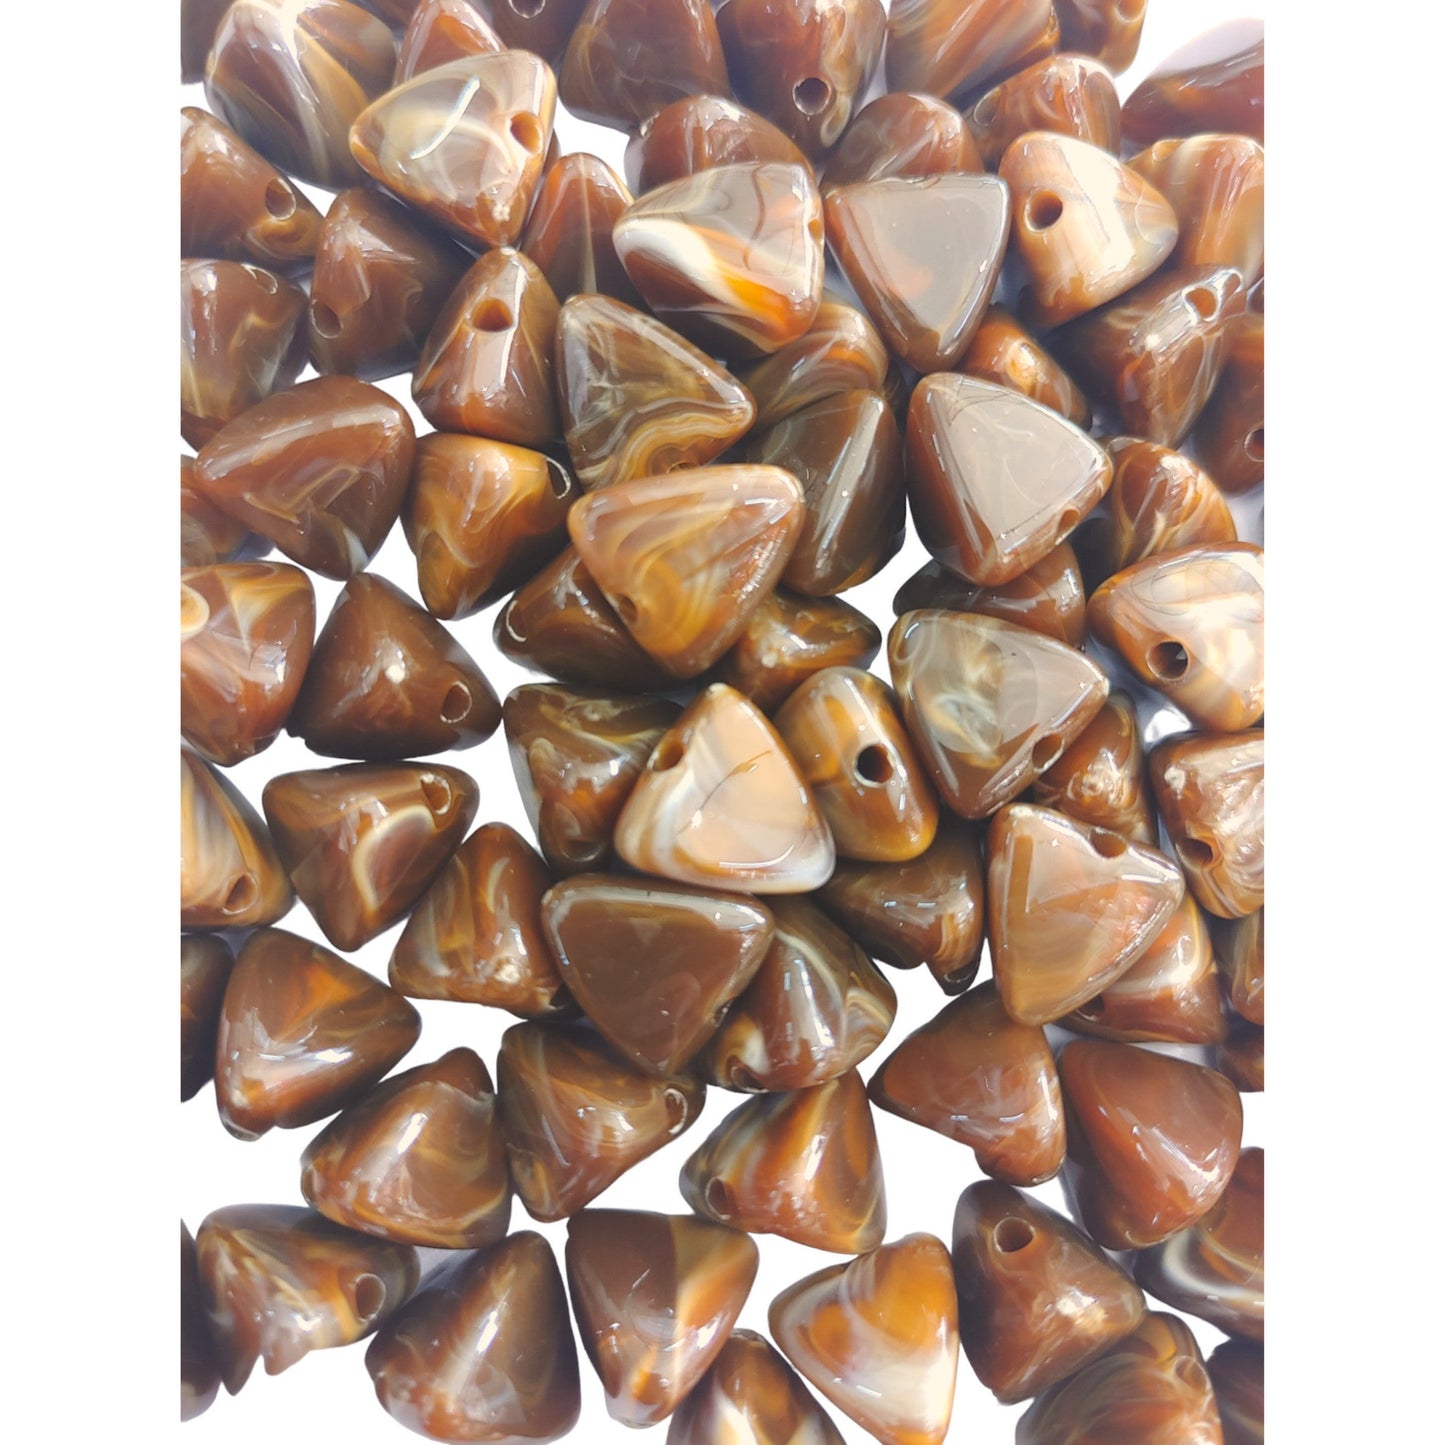 Indian Perals Pyramid Shaped Color Marble Beads Ideal for Jewelry designing and Craft Making or Decor